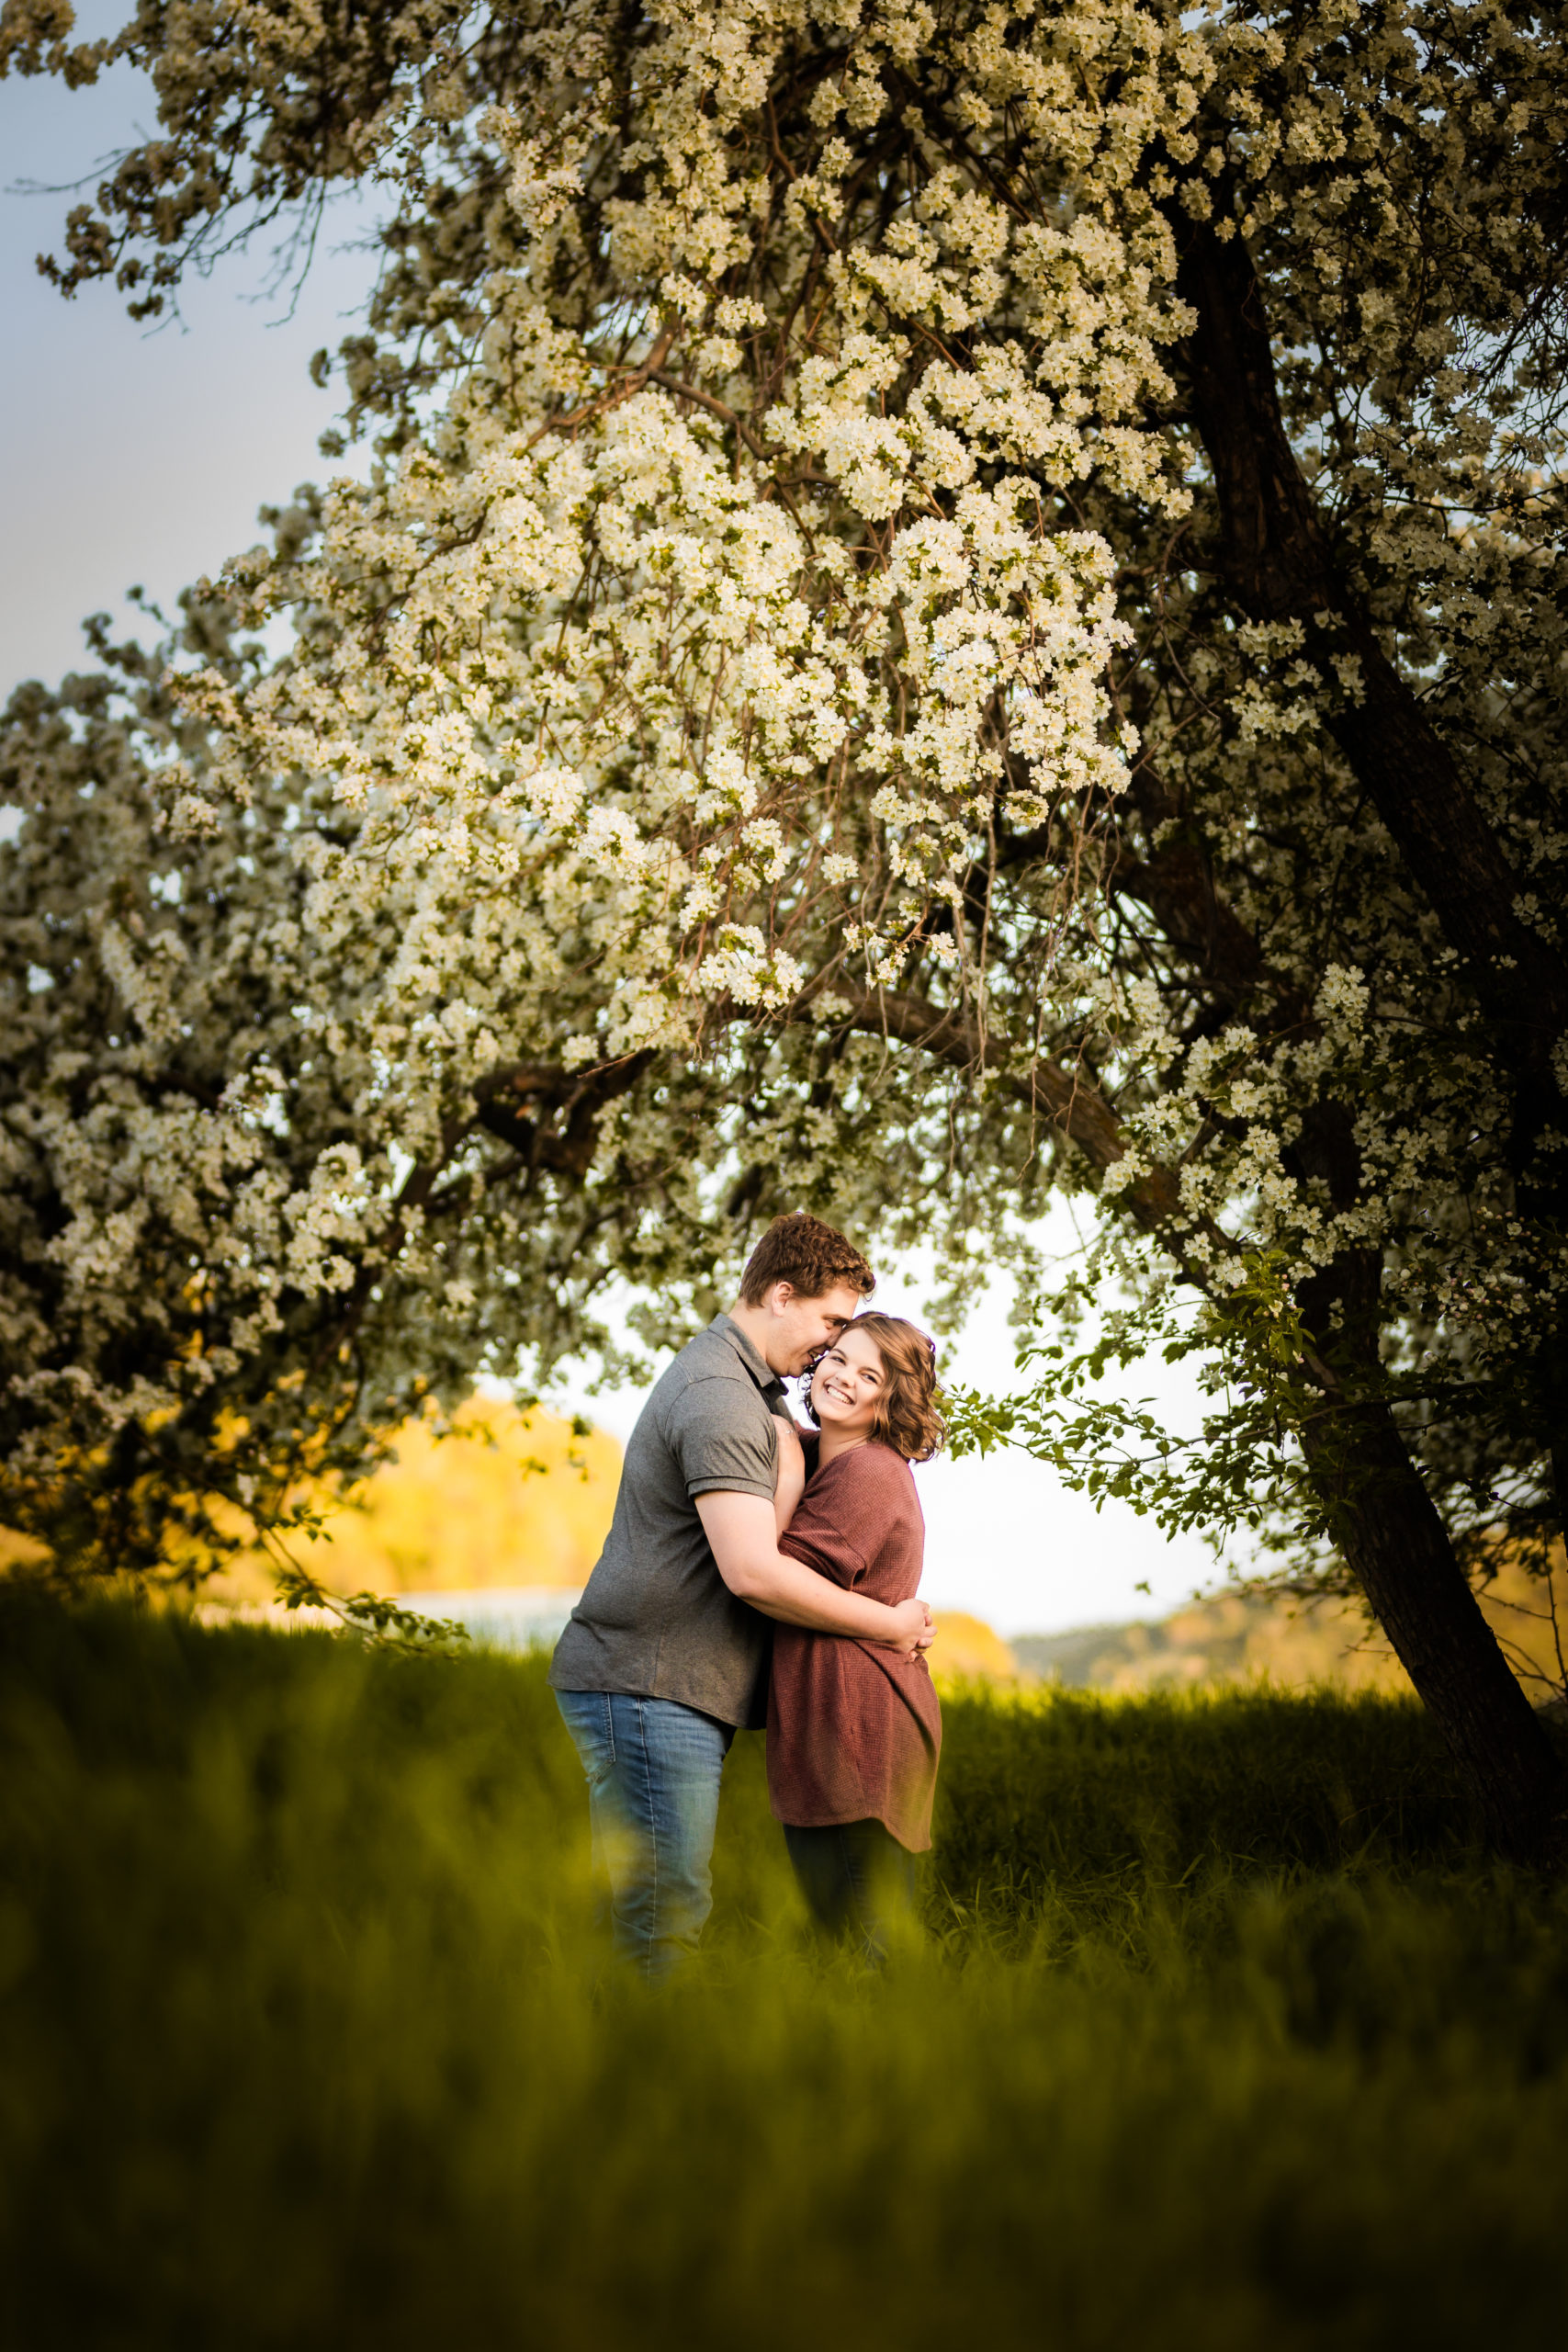 man whispering in woman's ear during engagement photos